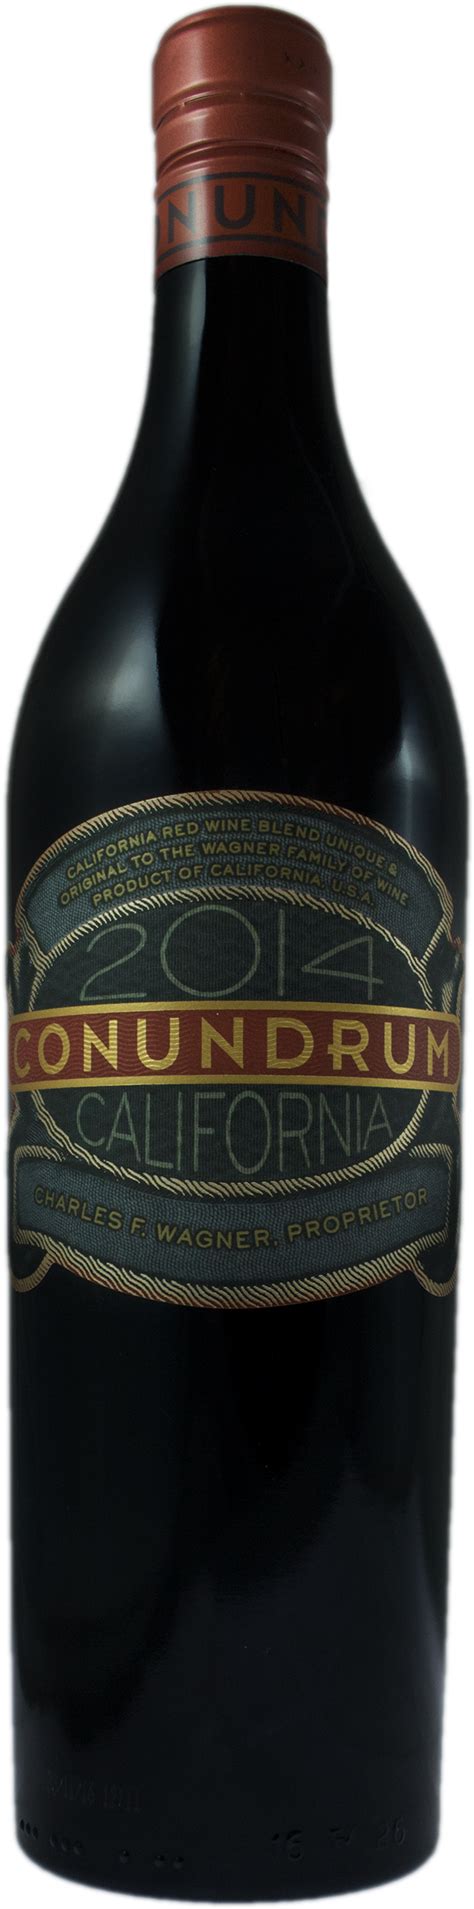 2014 Conundrum Red Blend Wine Library